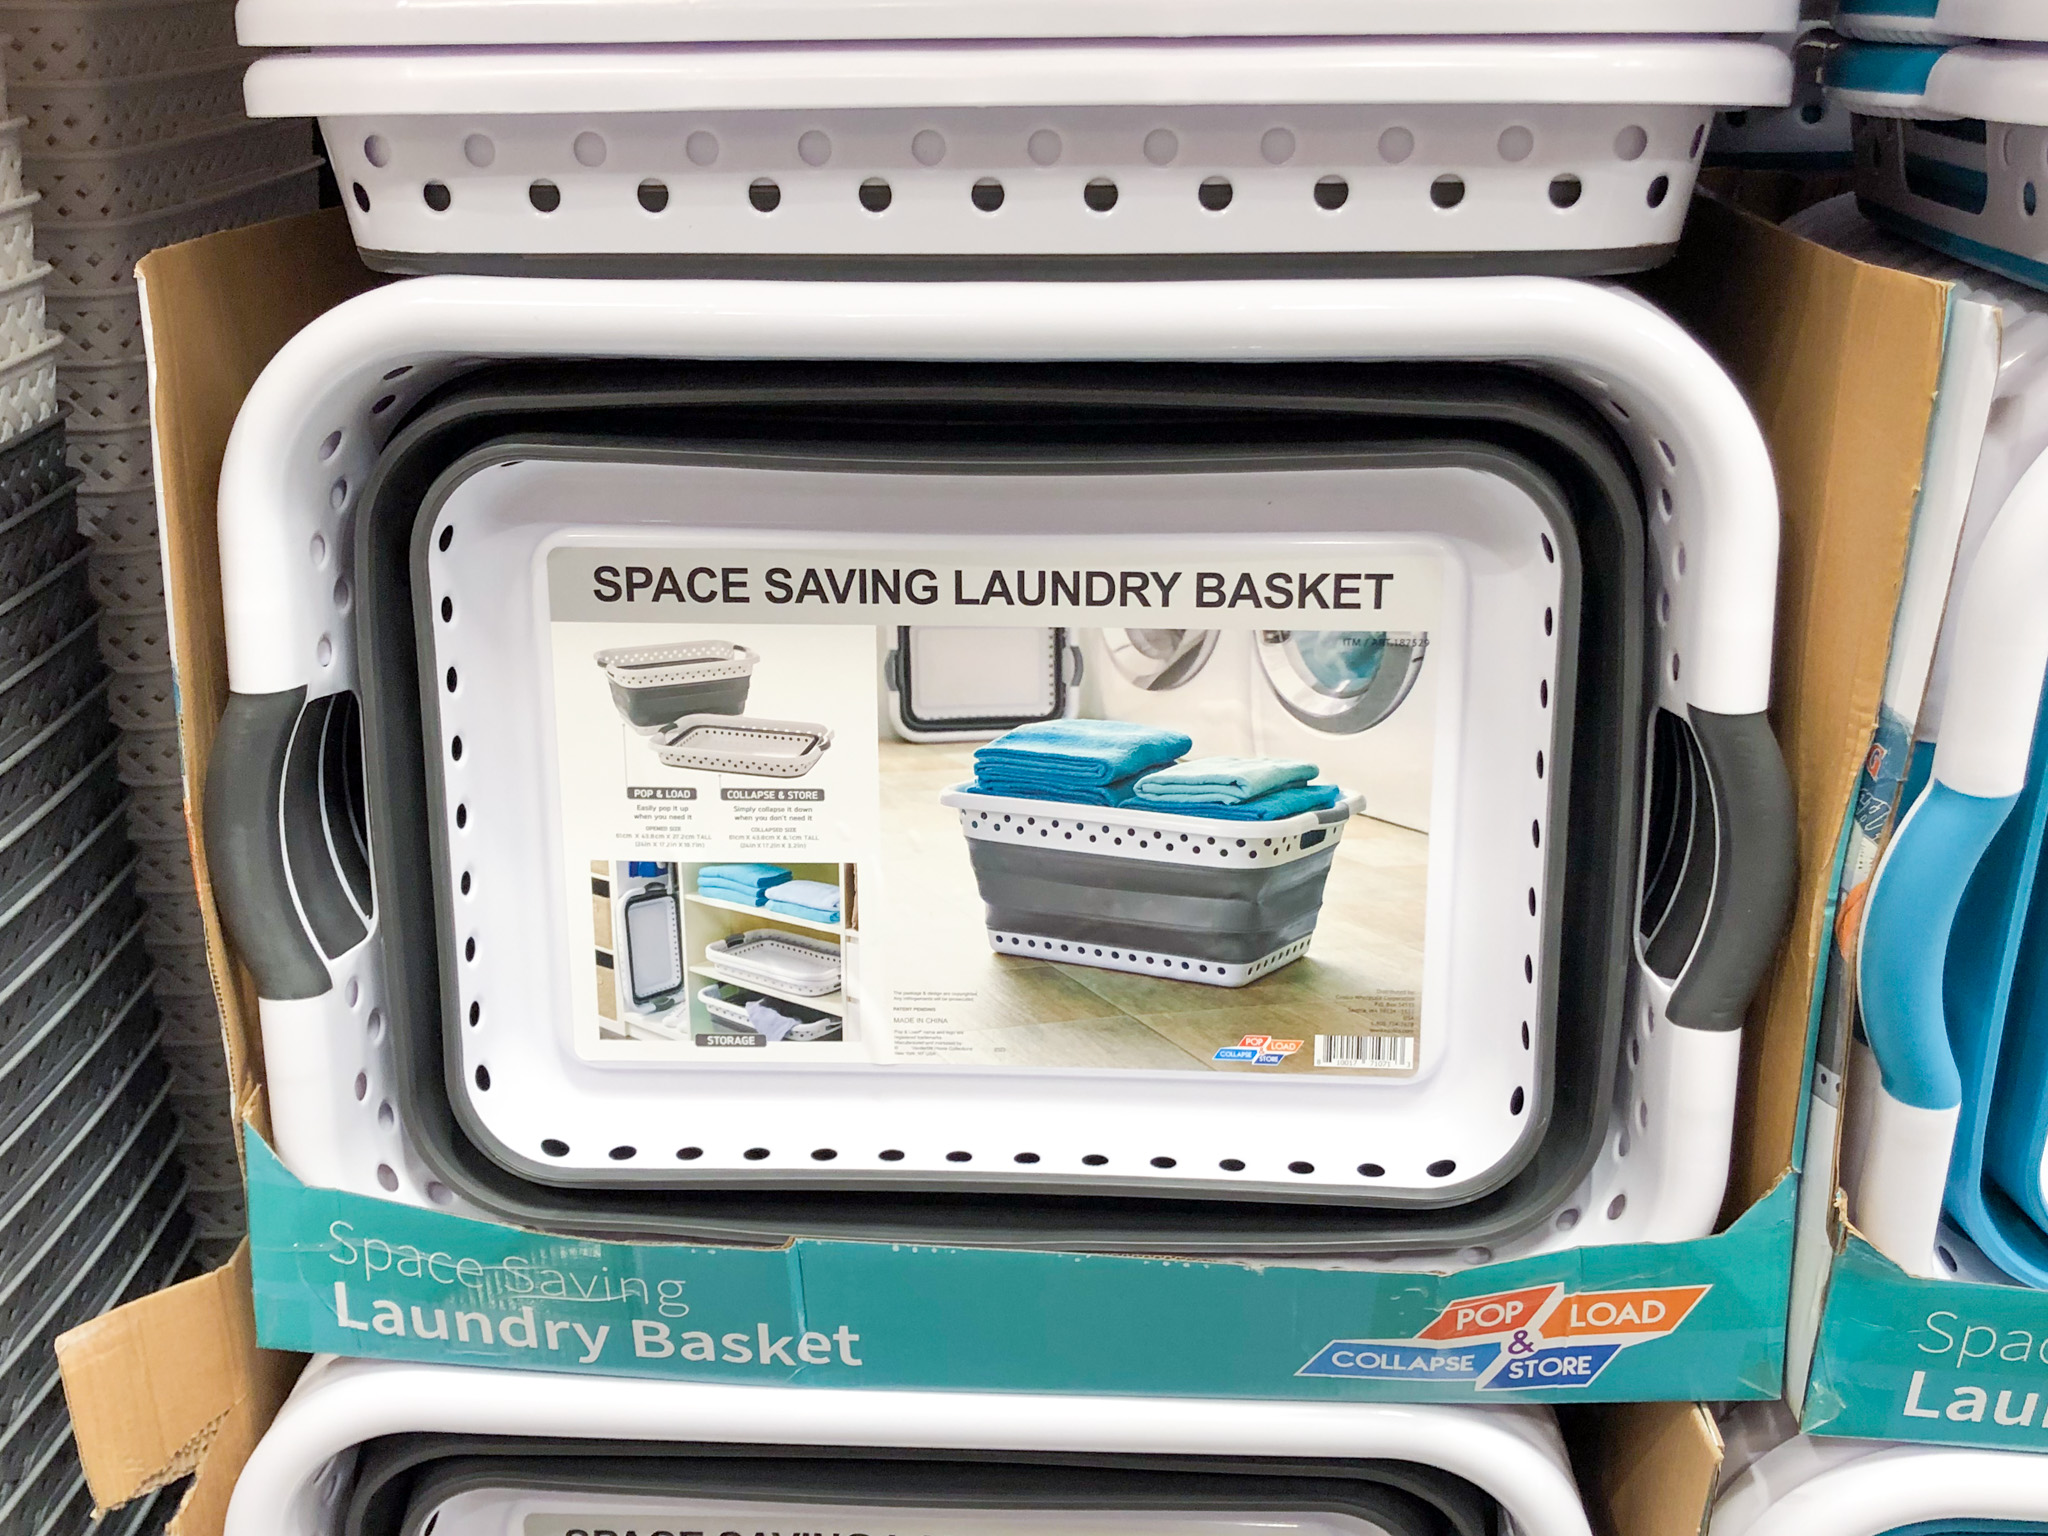 Pop & Load Collapsible Laundry Basket, Only $9.99 at Costco - The